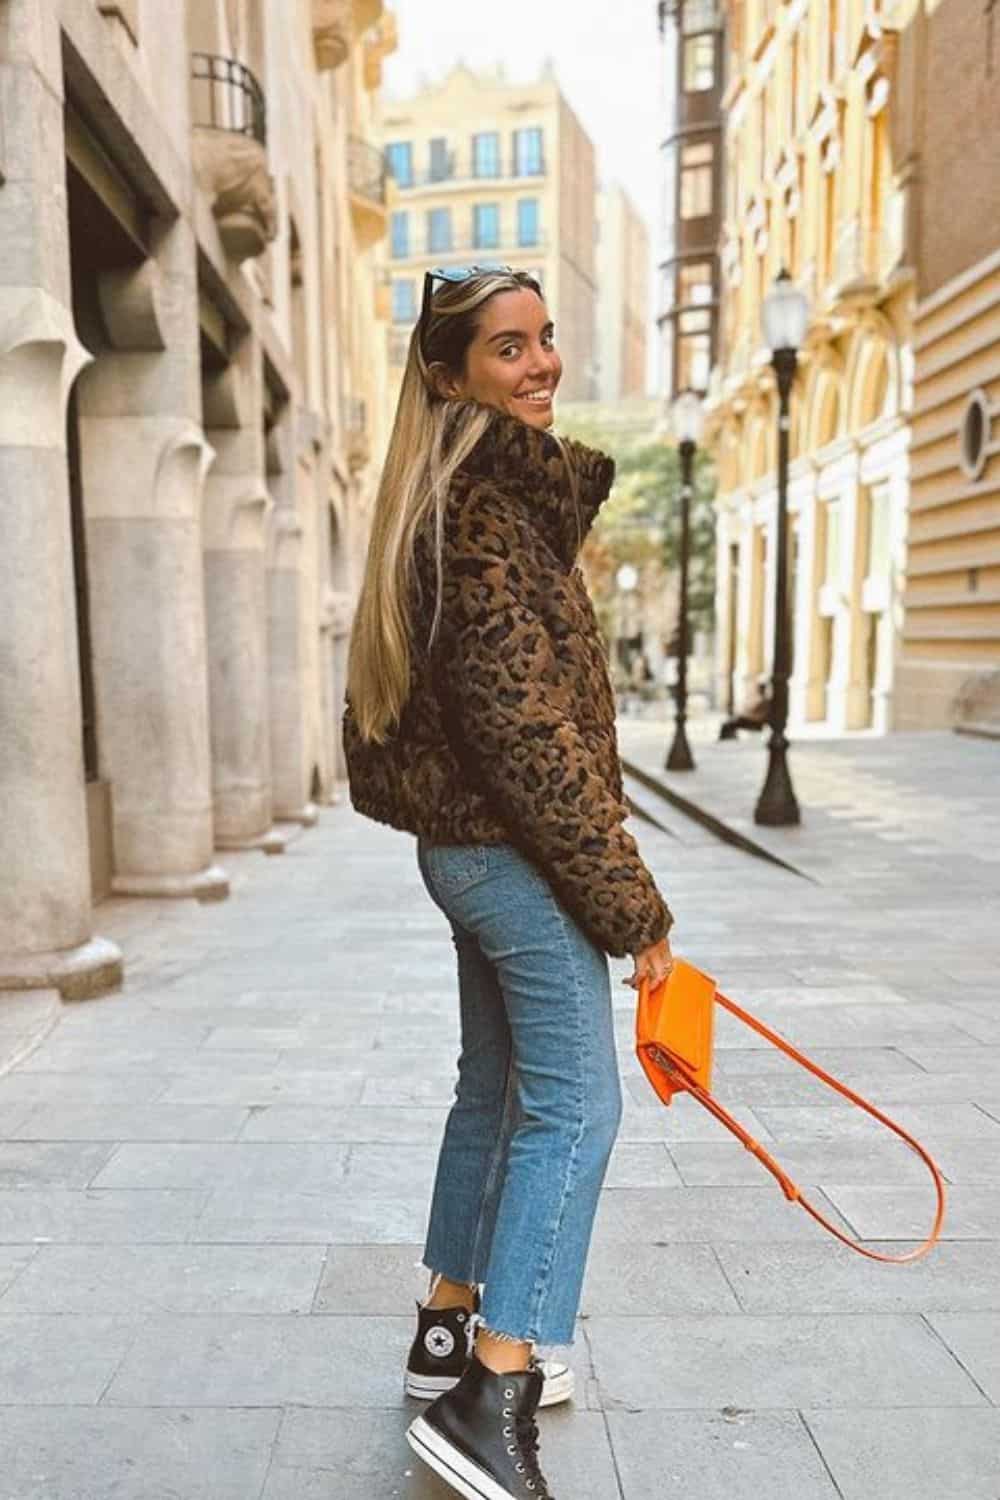 How to style animal prints with animal print puffer, jeans, sneakers, and a pop of color bag